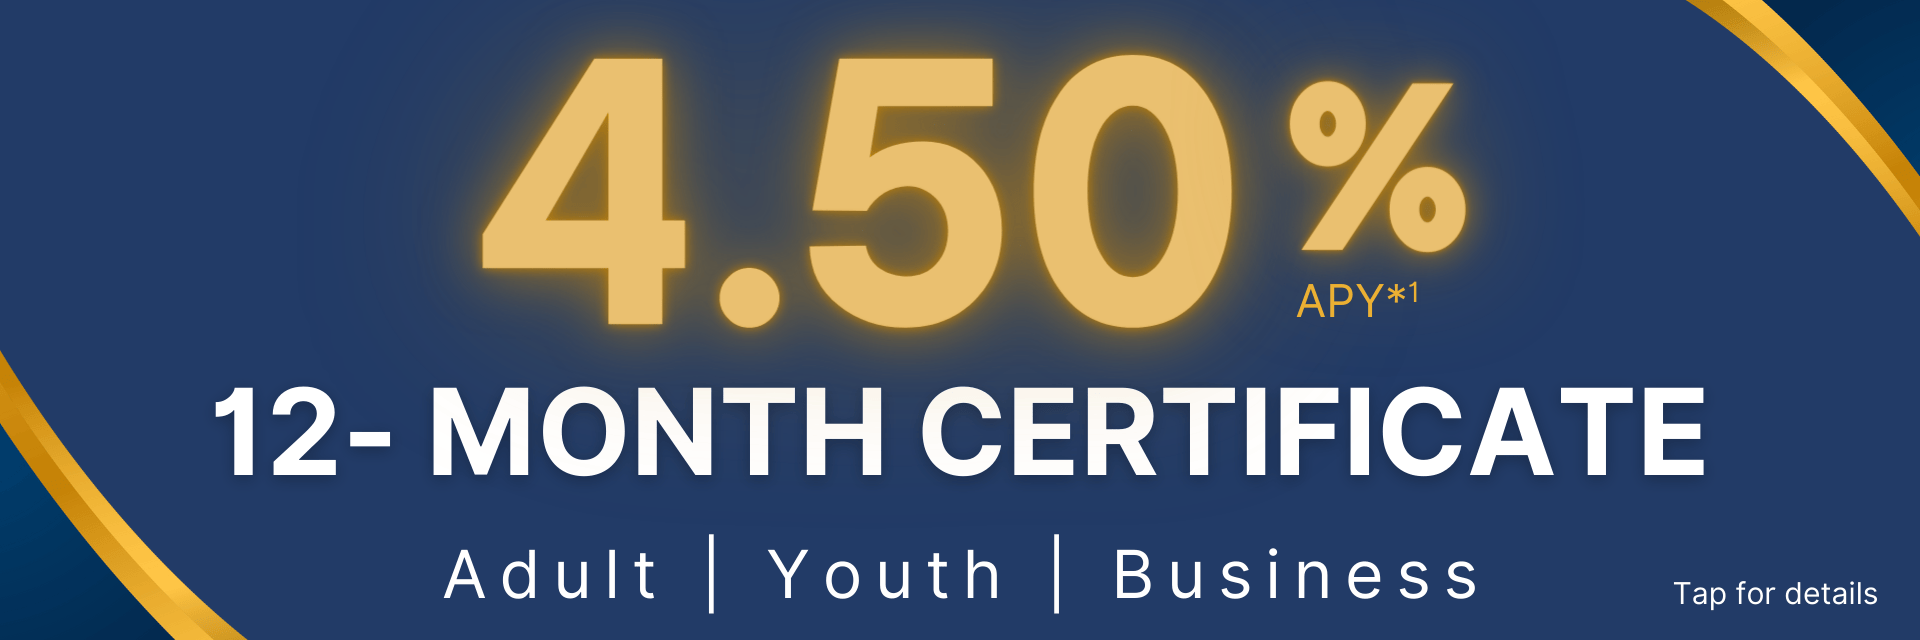 4.50% APR on a 12-month certificate. Tap here for details